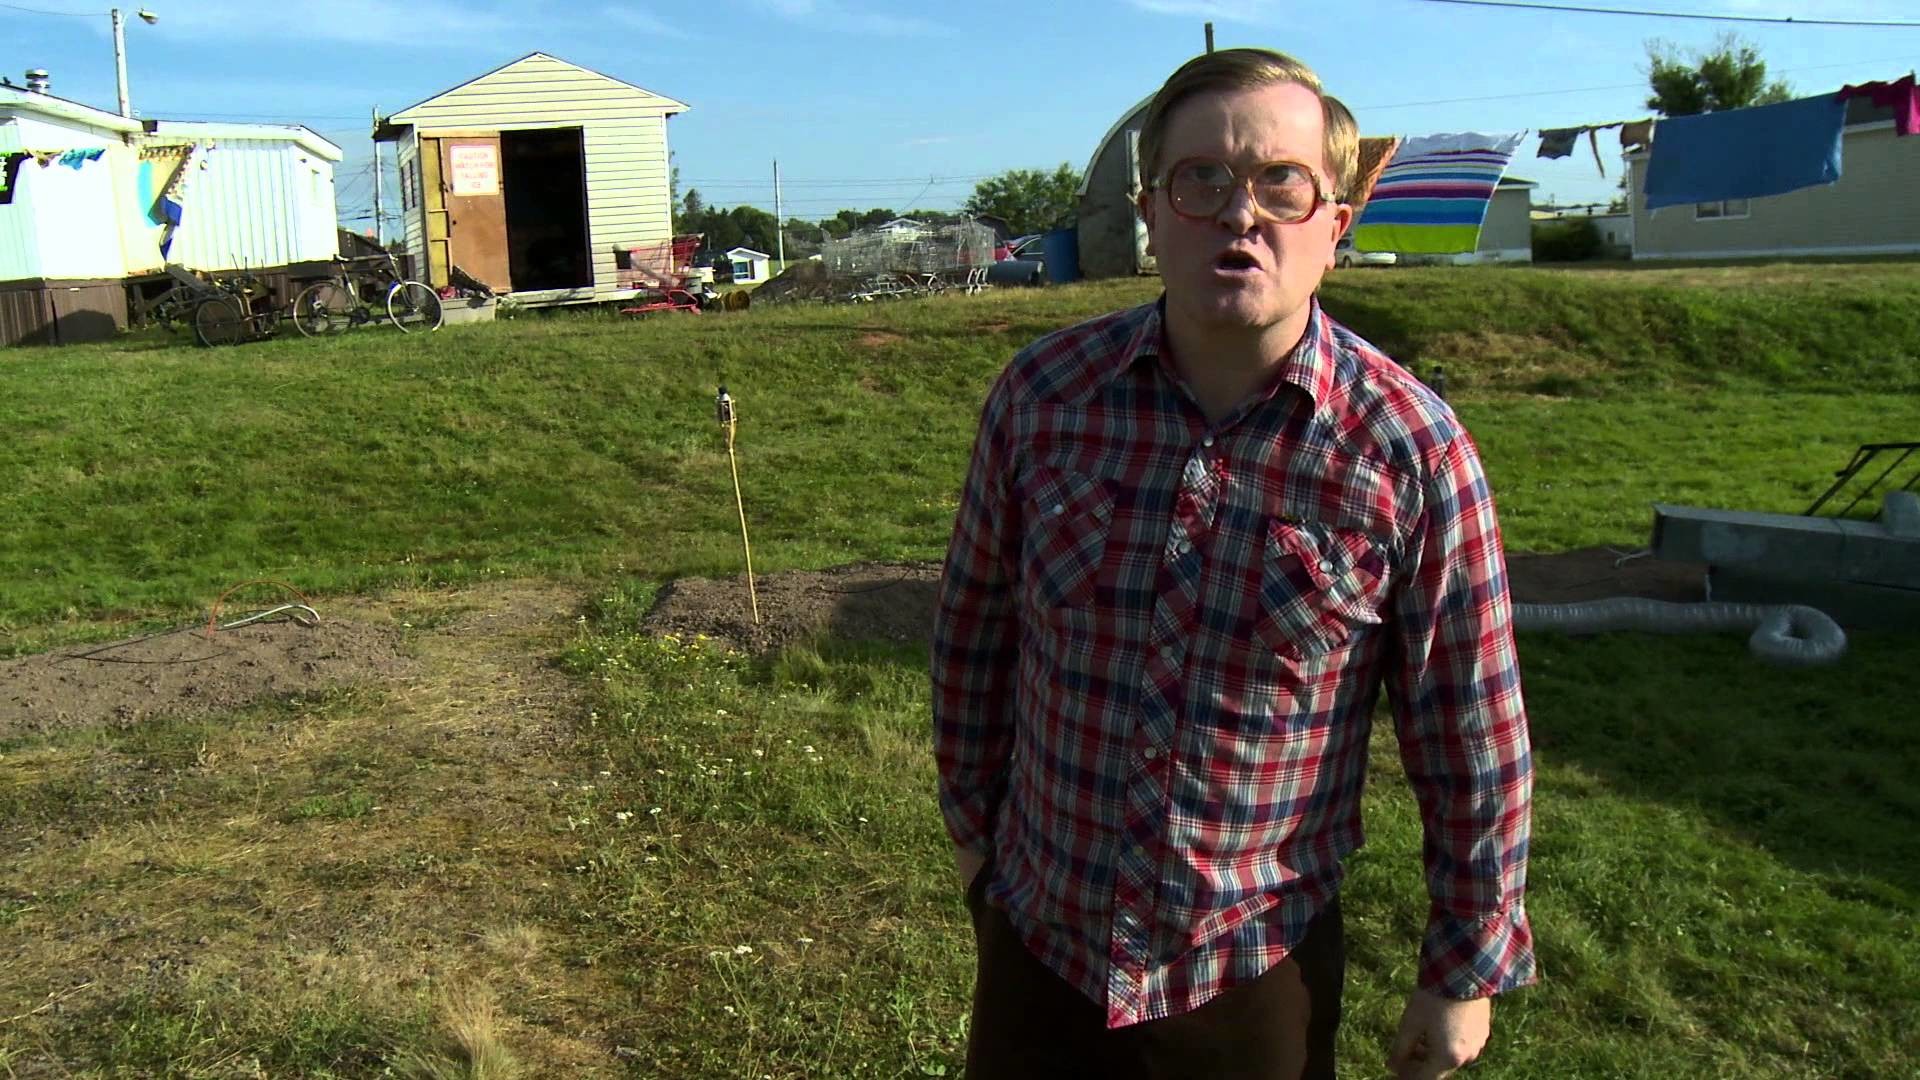 1920x1080 Trailer Park Boys - Exclusively on Netflix- Clip - Catch Up On ..